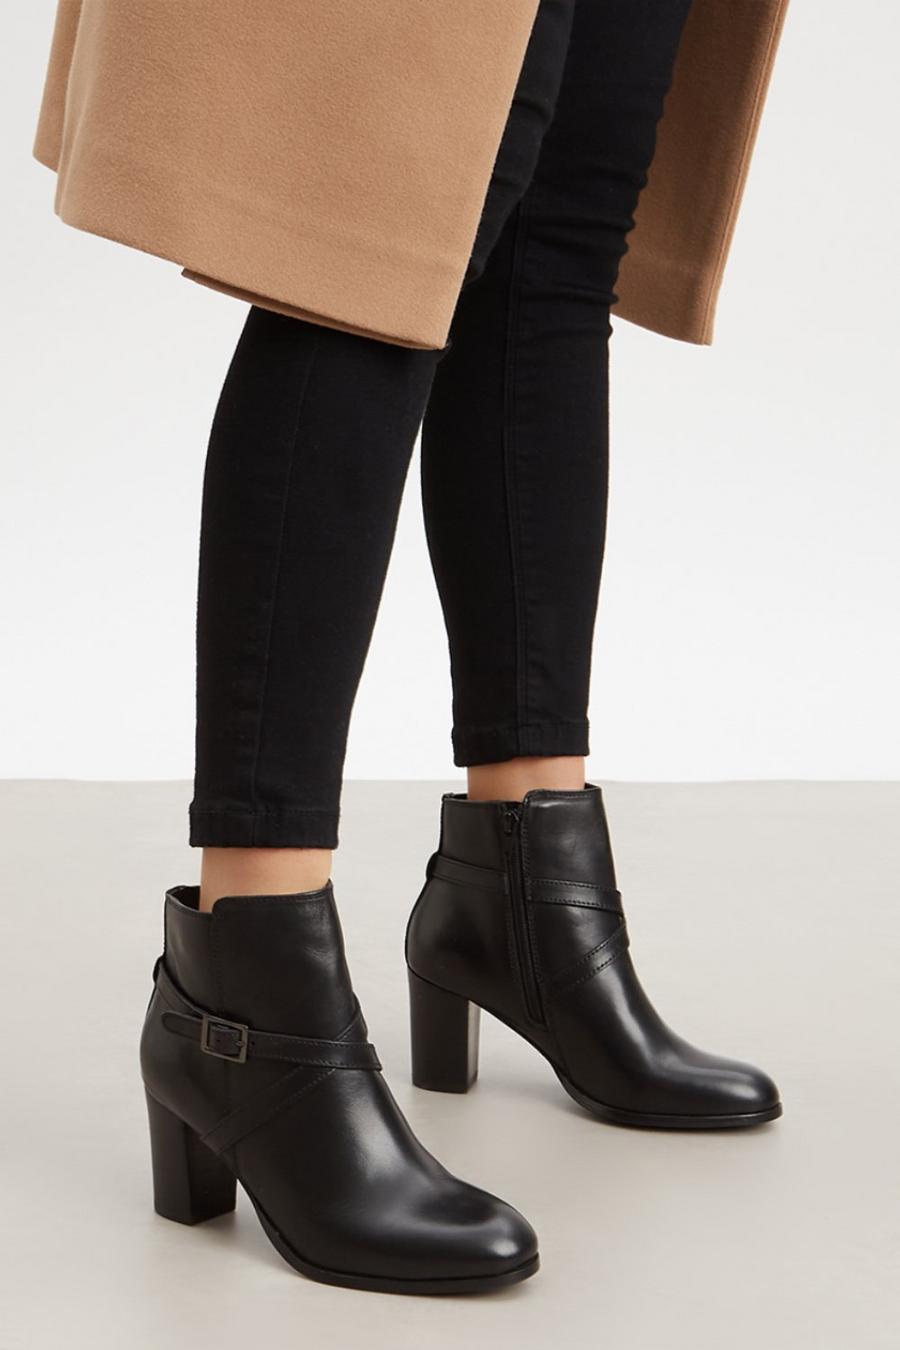 Good For The Sole: Reese Leather Heeled Ankle Boot